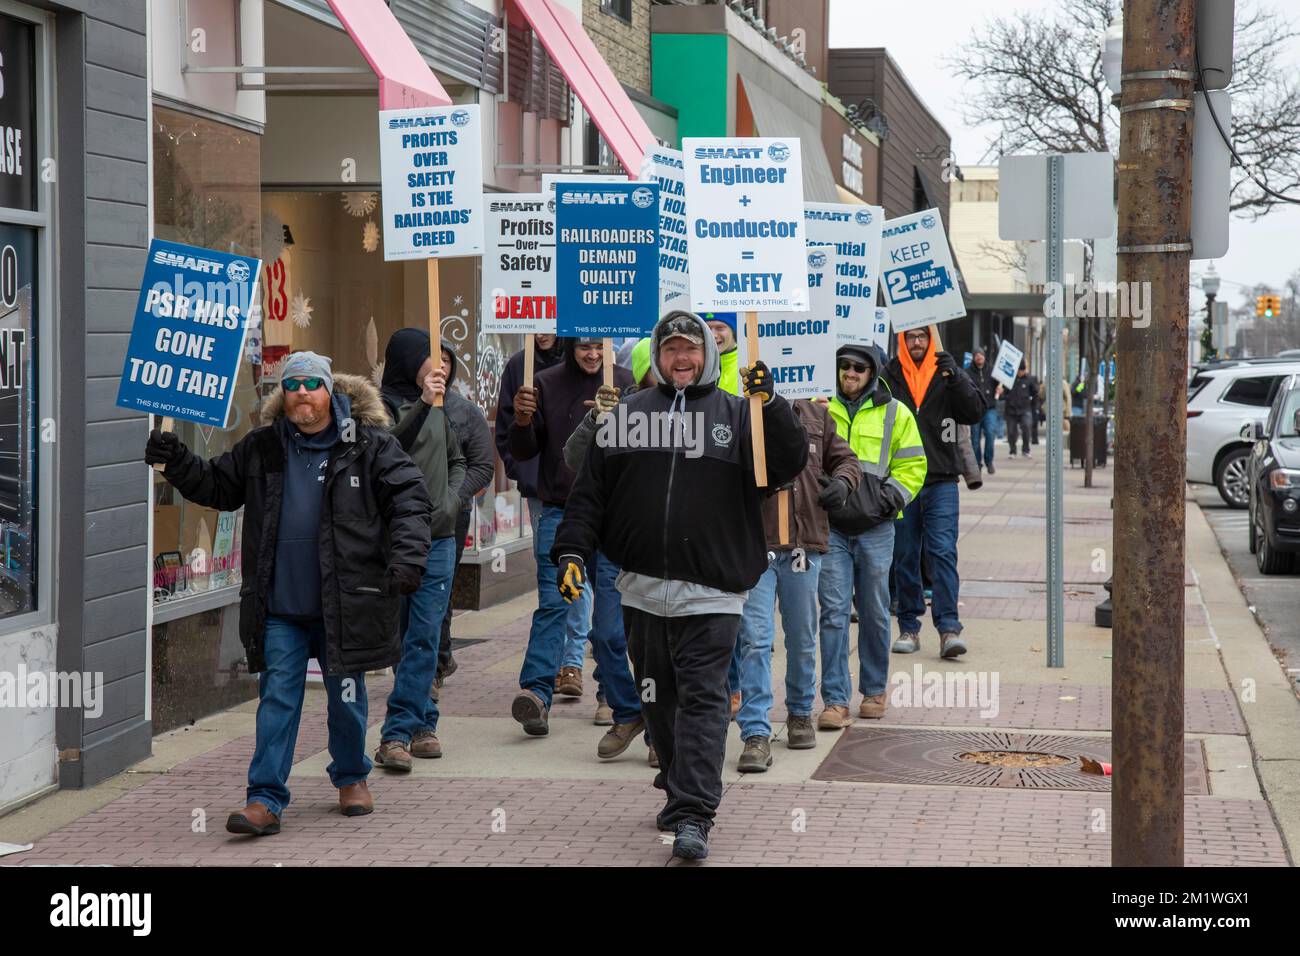 Royal Oak, Michigan, USA. 13th Dec, 2022. Railroad workers rally in suburban Detroit, upset that railroads are emphasizing profits over safety, and still angry that sick pay was not included in the contract that Congress forced on them earlier this month. It was one of a number of rallies held across the United States, organized by the SMART Transportation Division. Credit: Jim West/Alamy Live News Stock Photo